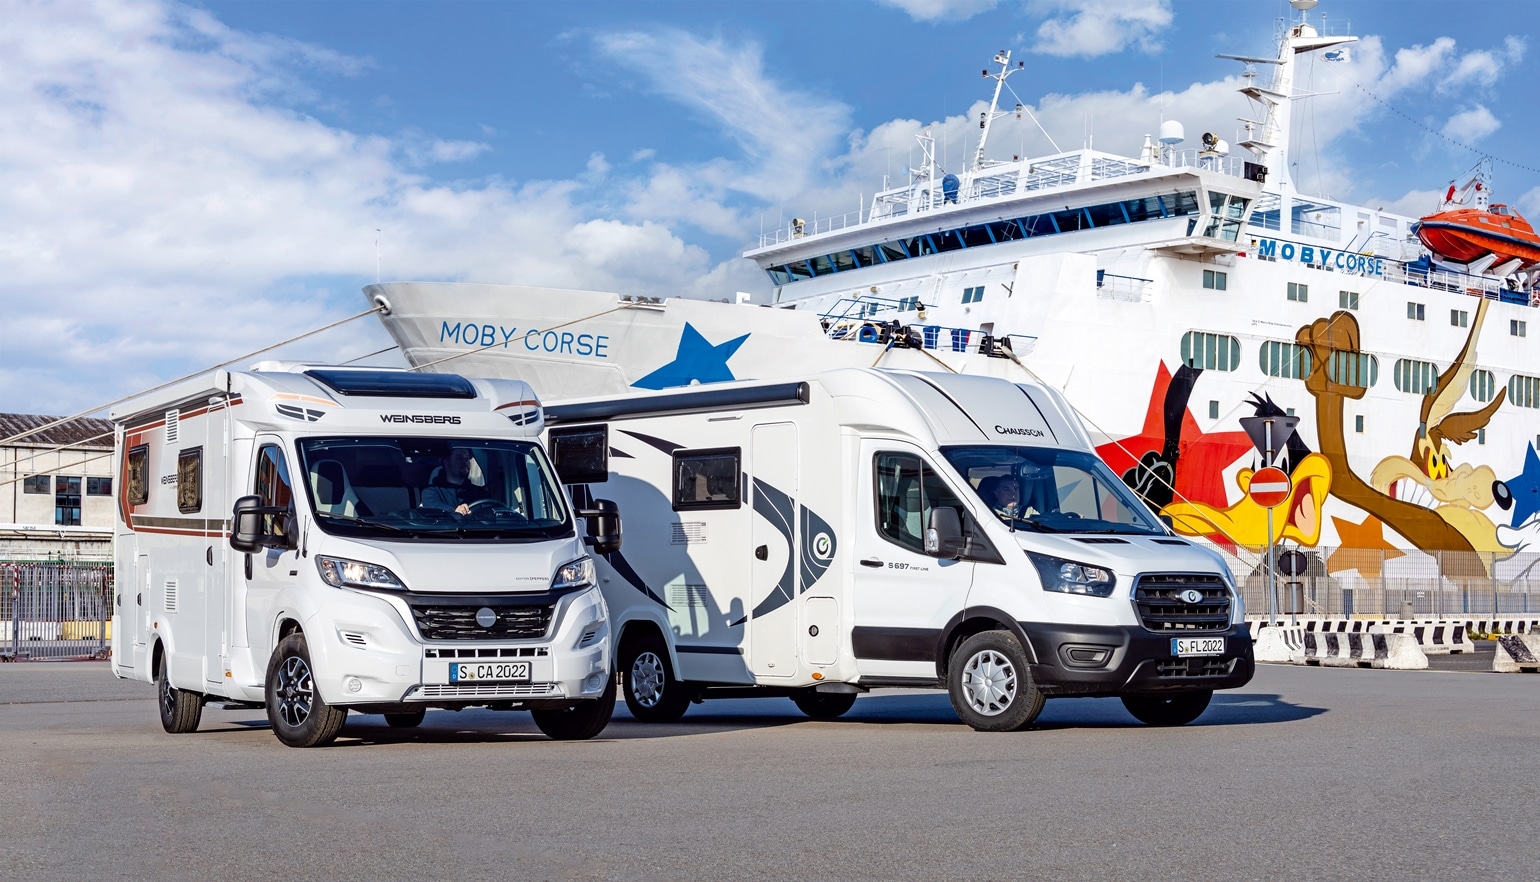 Campers_Weinsberg CaraCompact Edition Pepper 600 MEG vs. Chausson S 697 GA First Line